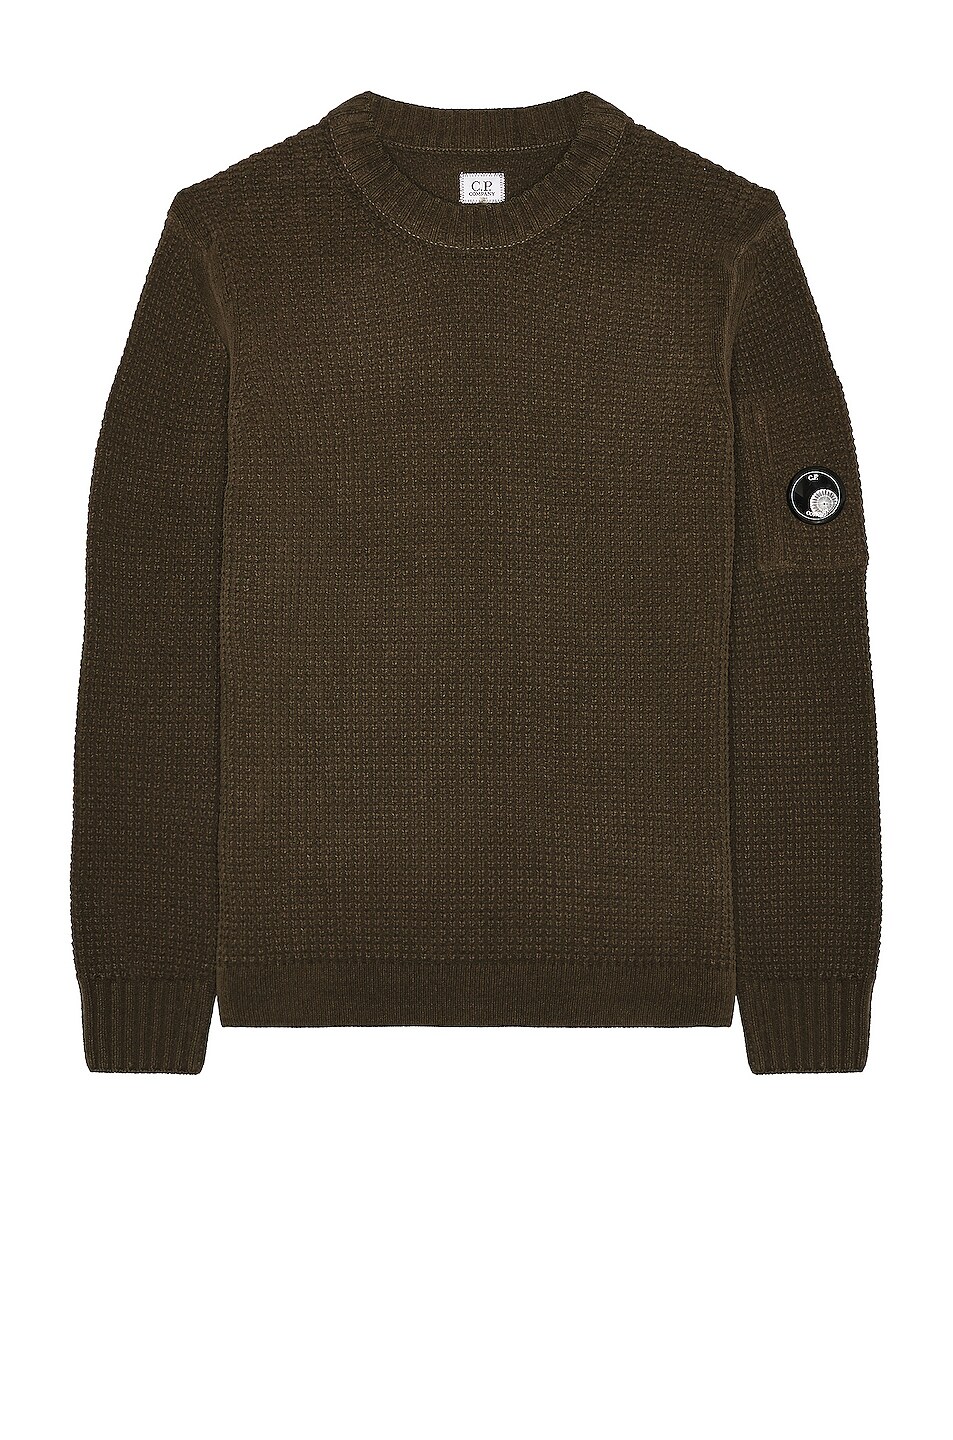 Image 1 of C.P. Company Crew Neck in Ivy Green